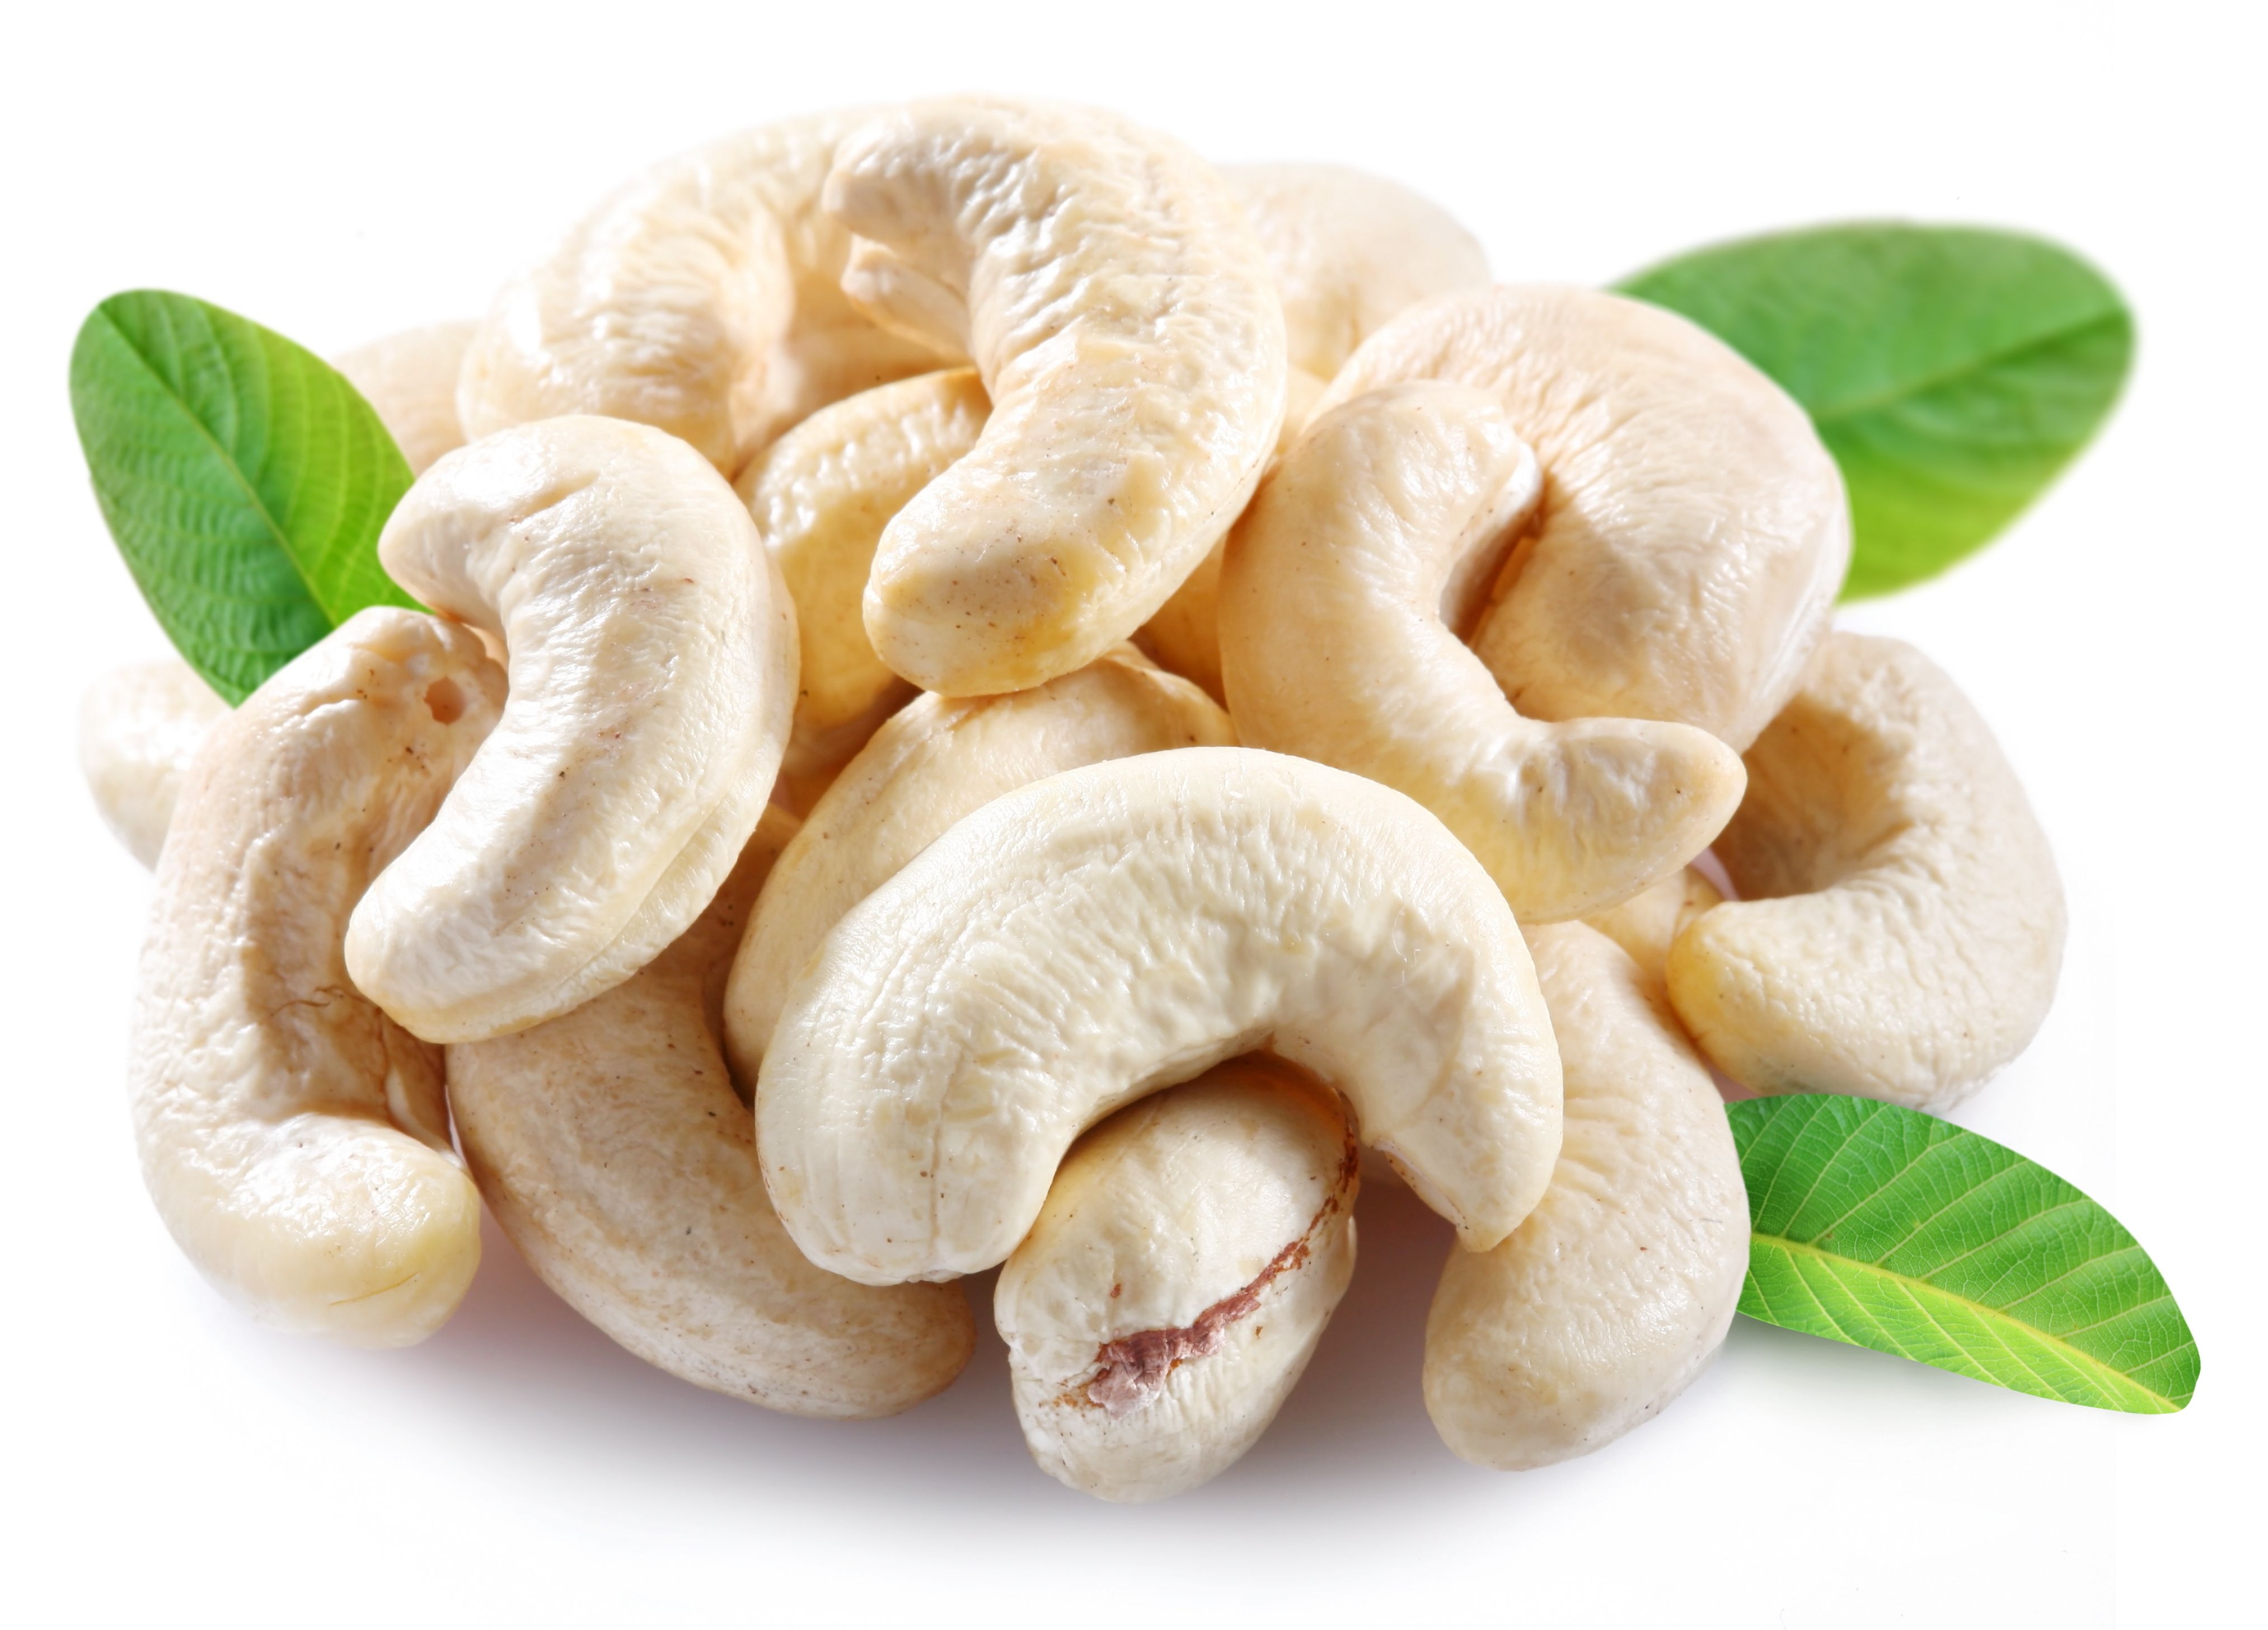 Cashew nuts: everything you need to know - GymBeam Blog